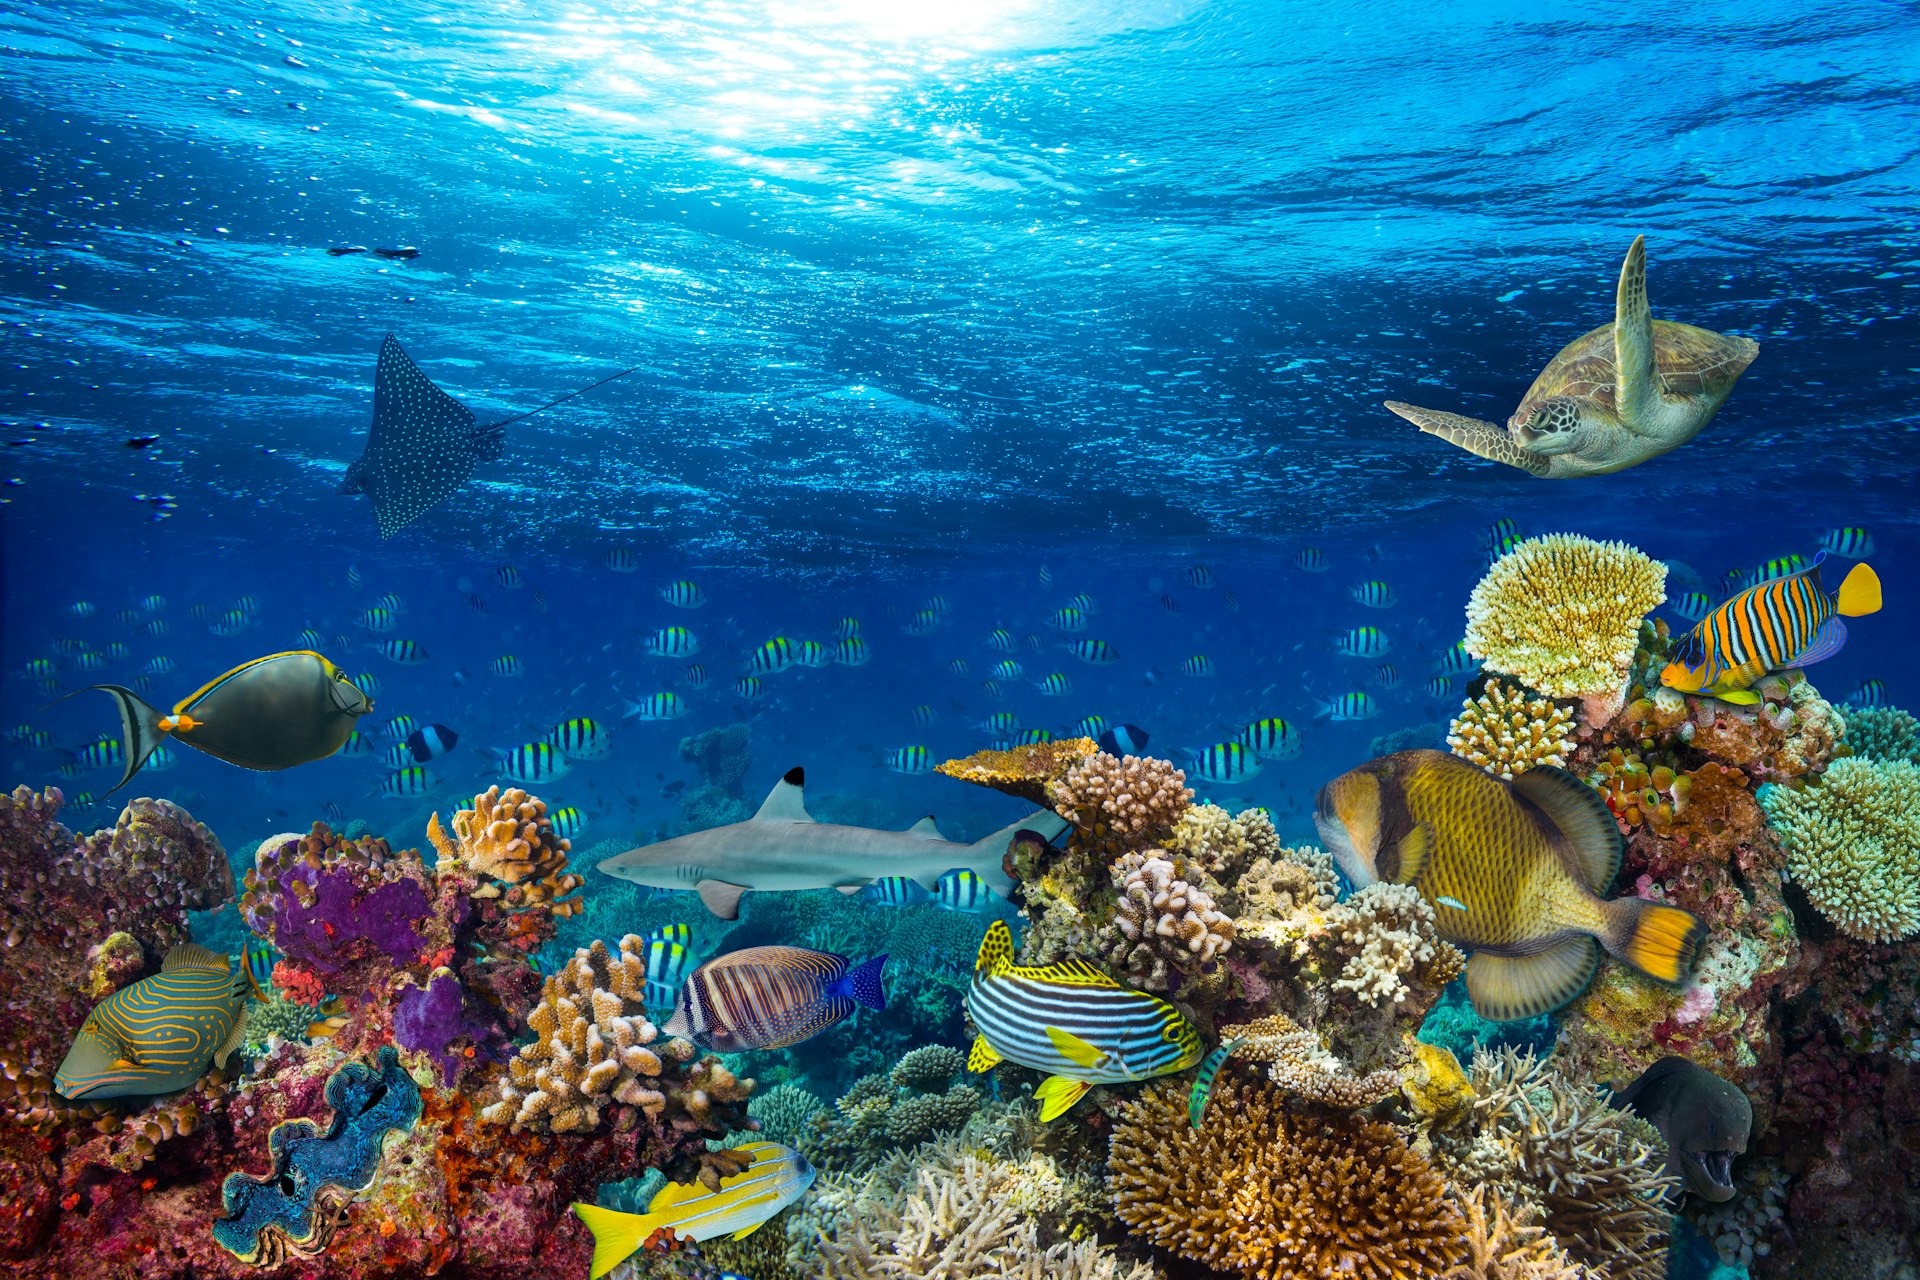 Underwater coral reef landscape in the Red Sea, Egypt